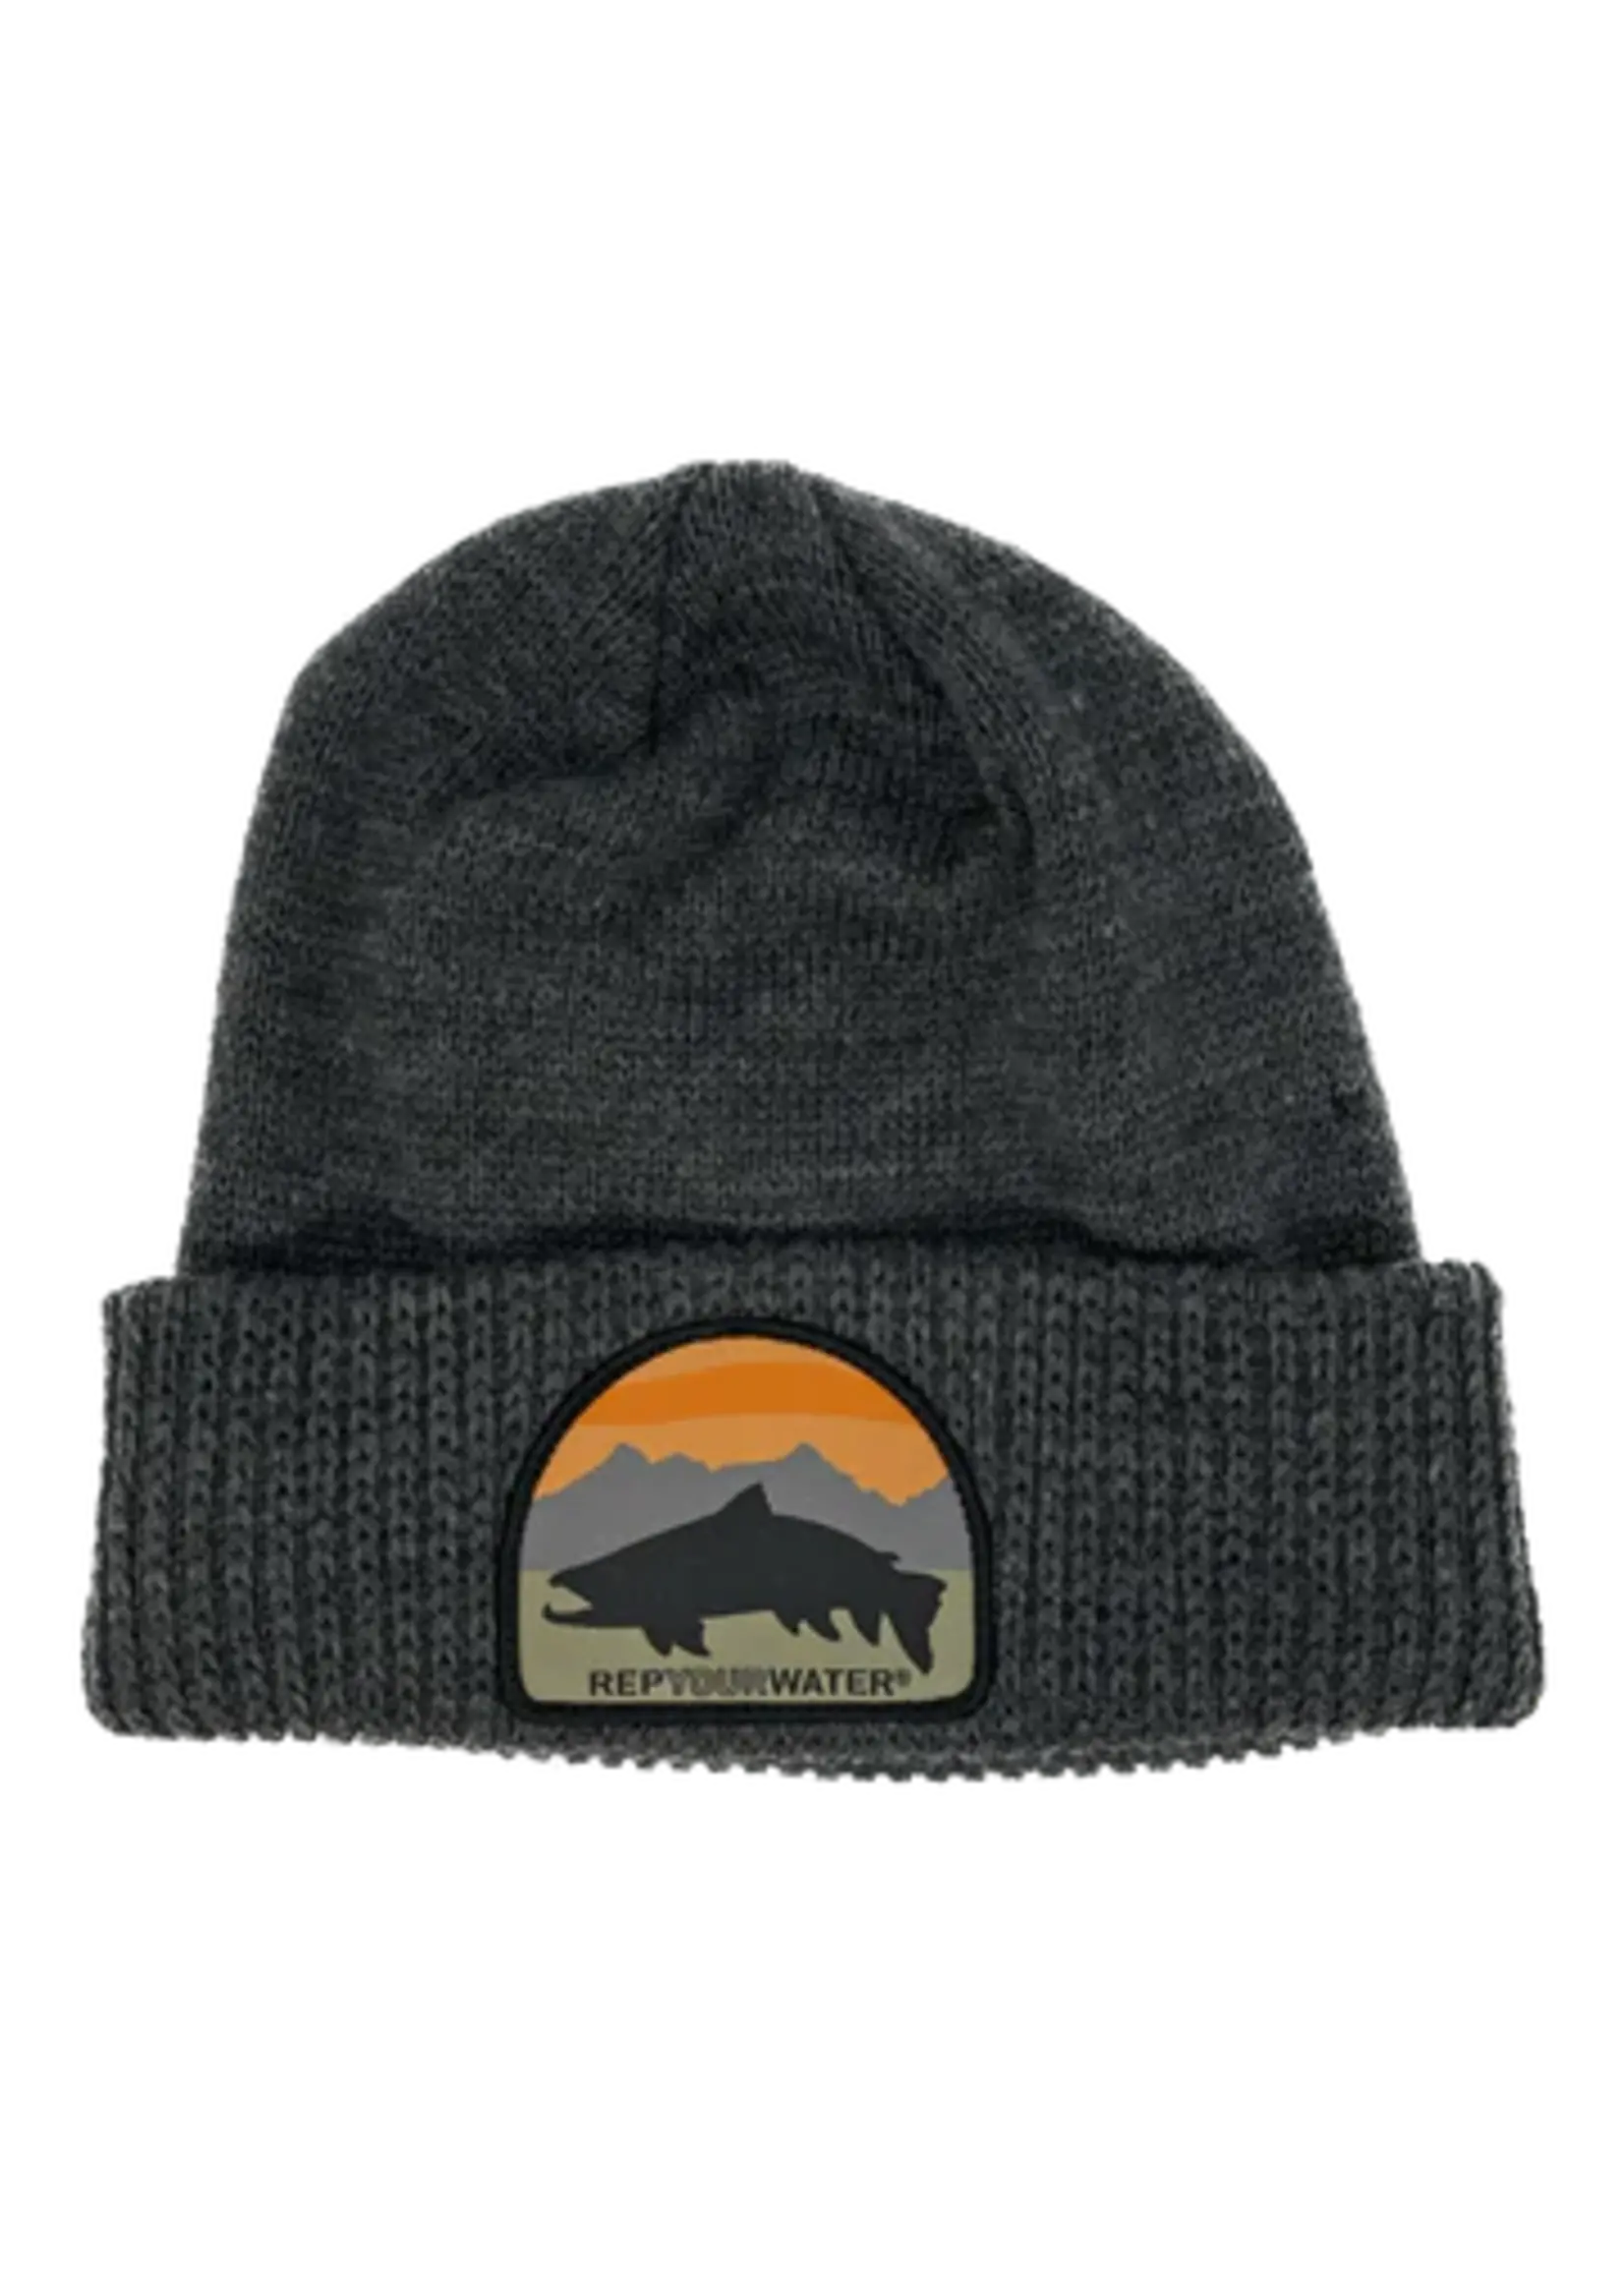 Rep Your Water RepYourWater Backcountry Trout Knit Hat